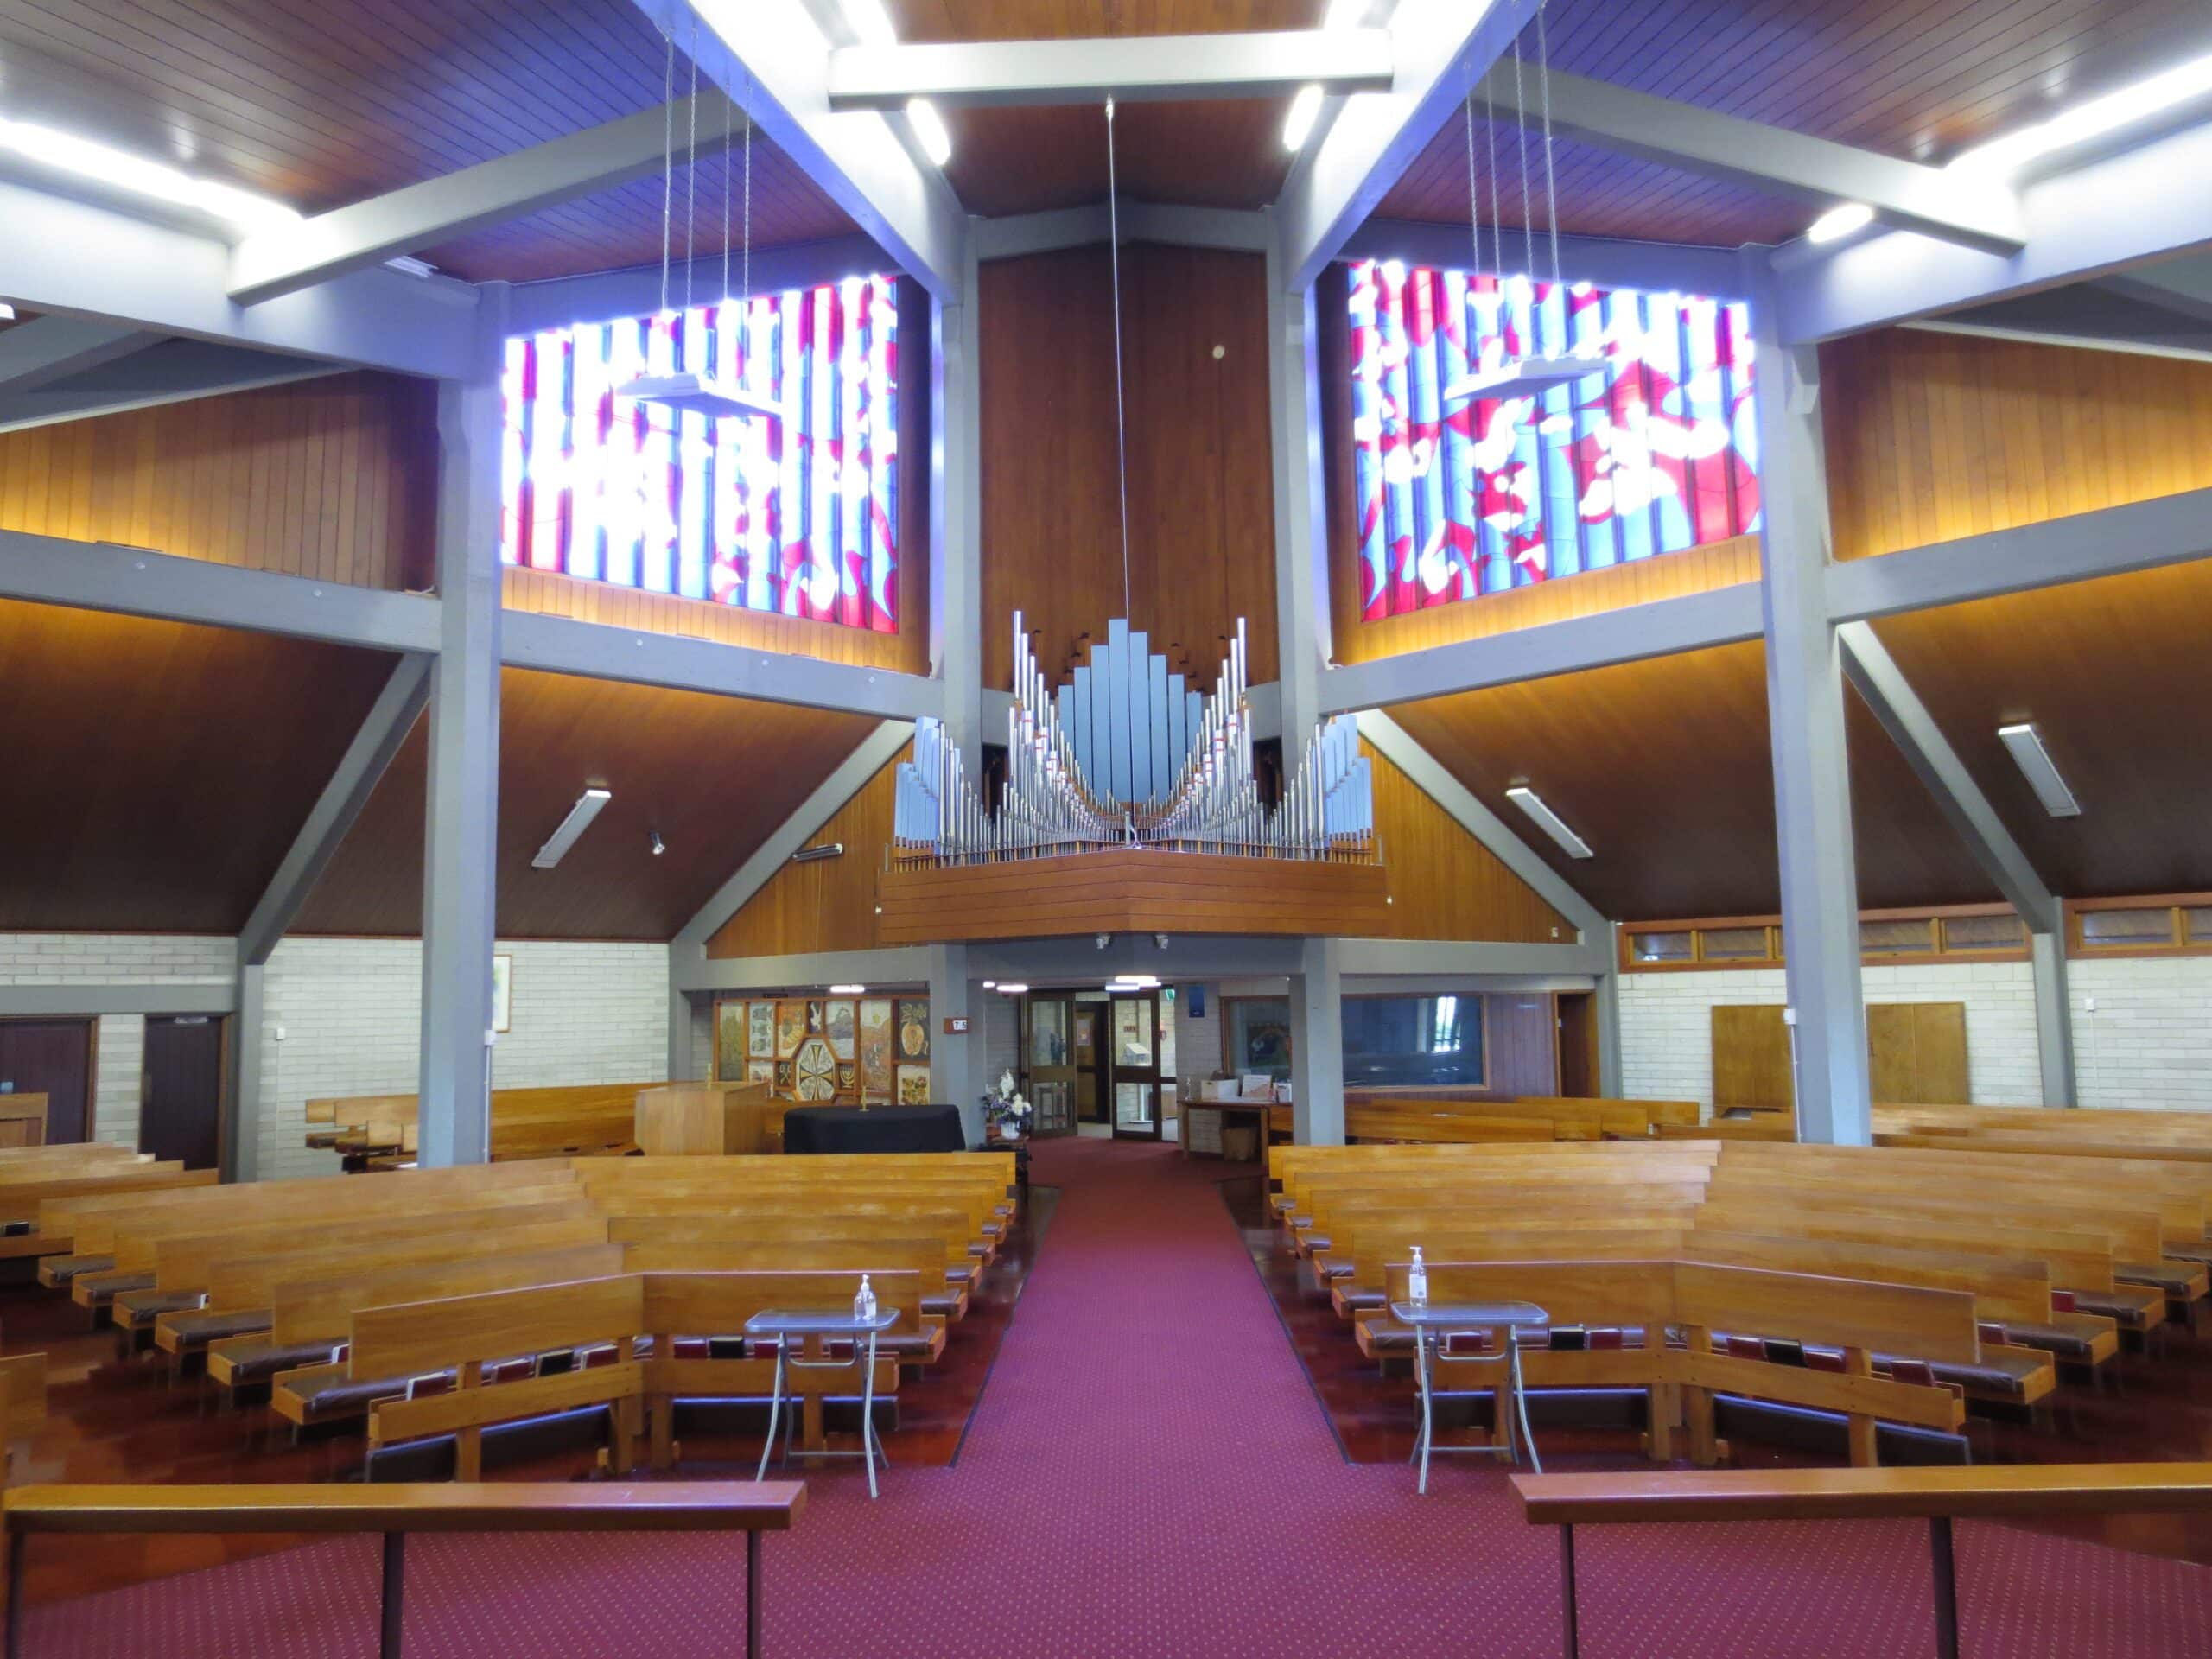 Main church organ and stained glass